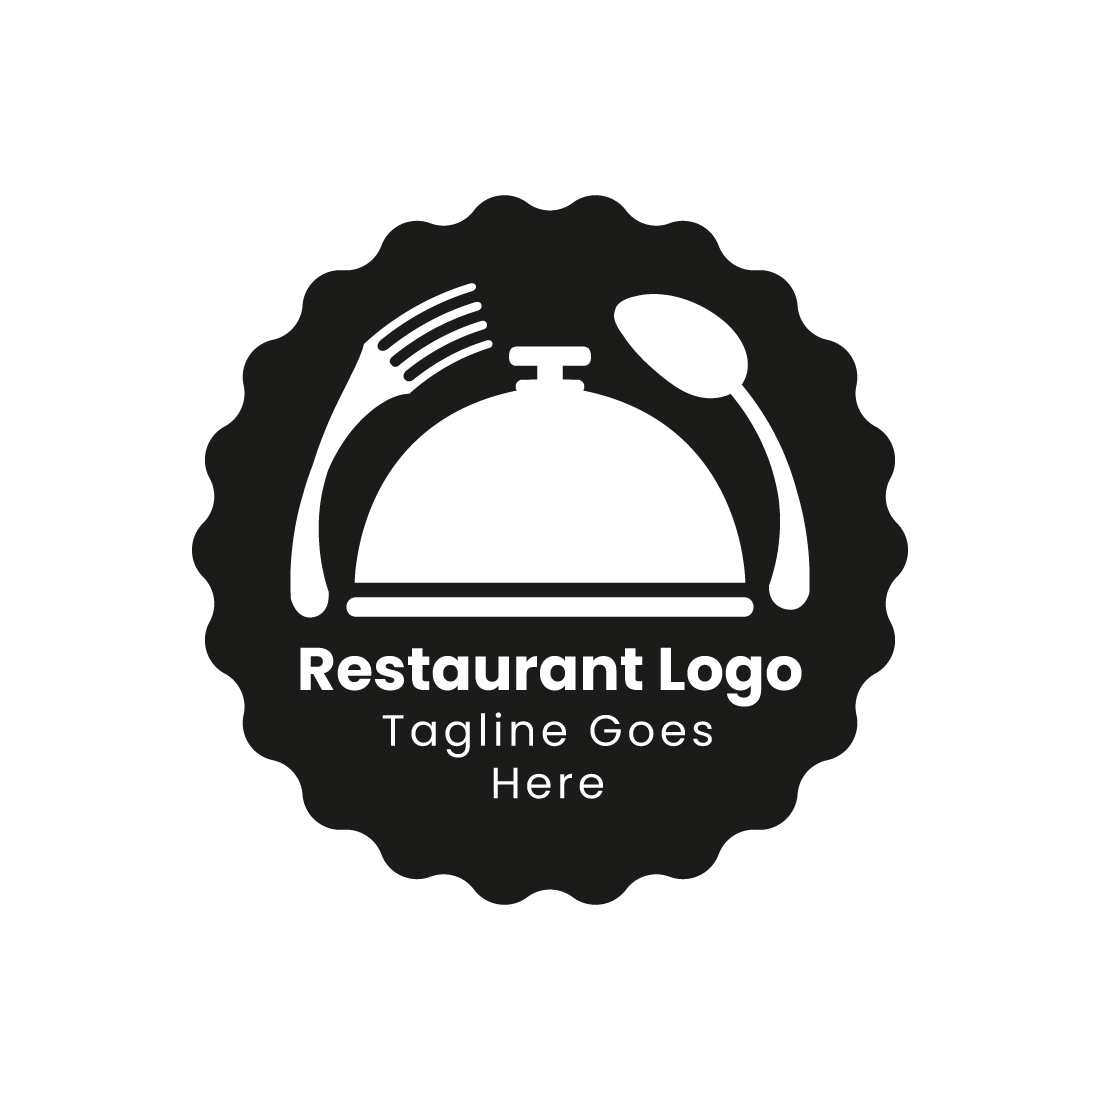 Resturant Logo preview image.